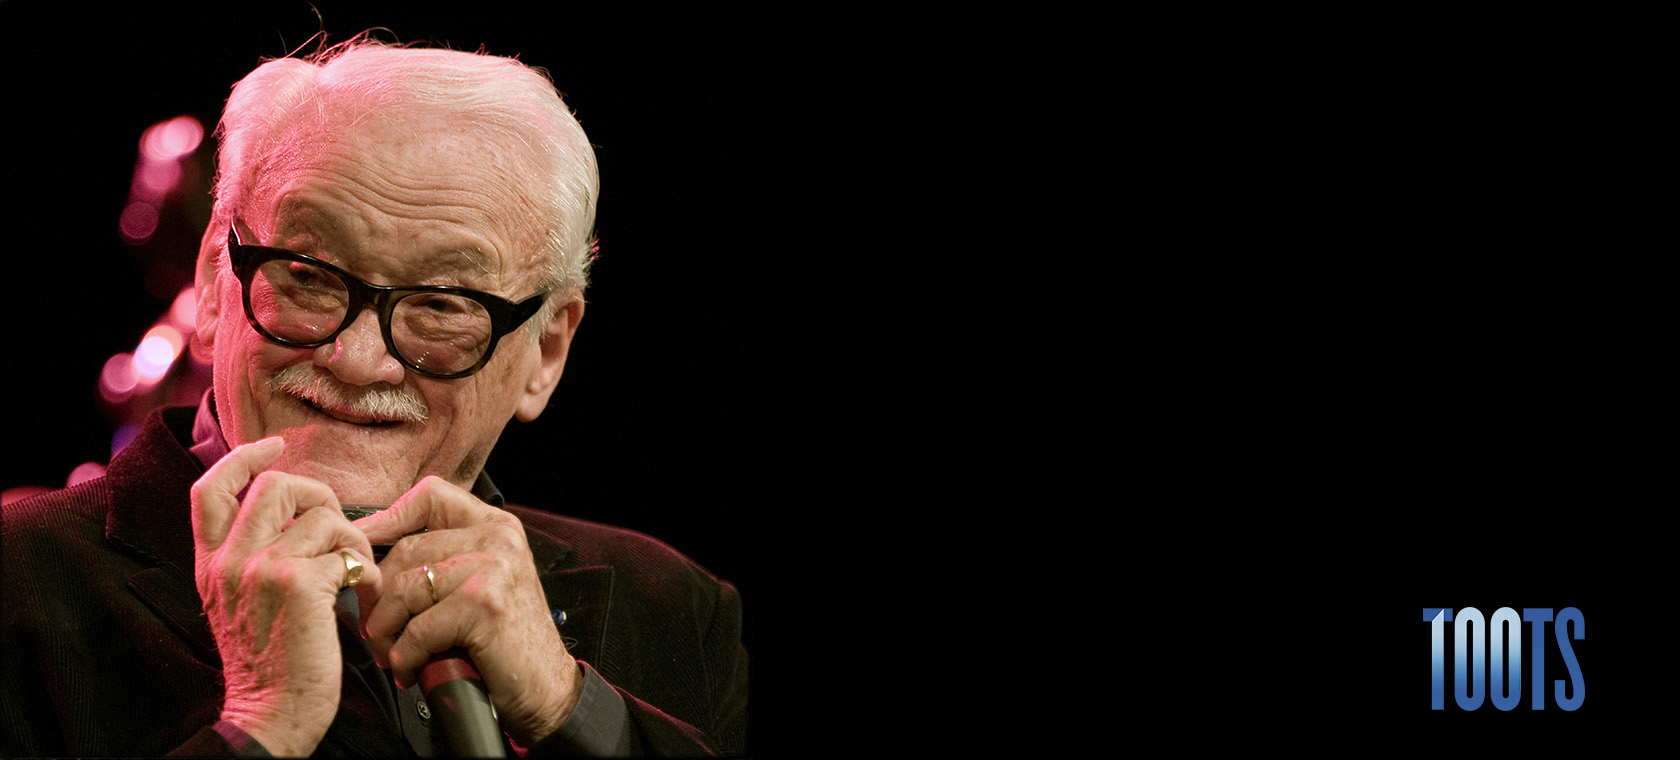 Tribute to Toots Thielemans